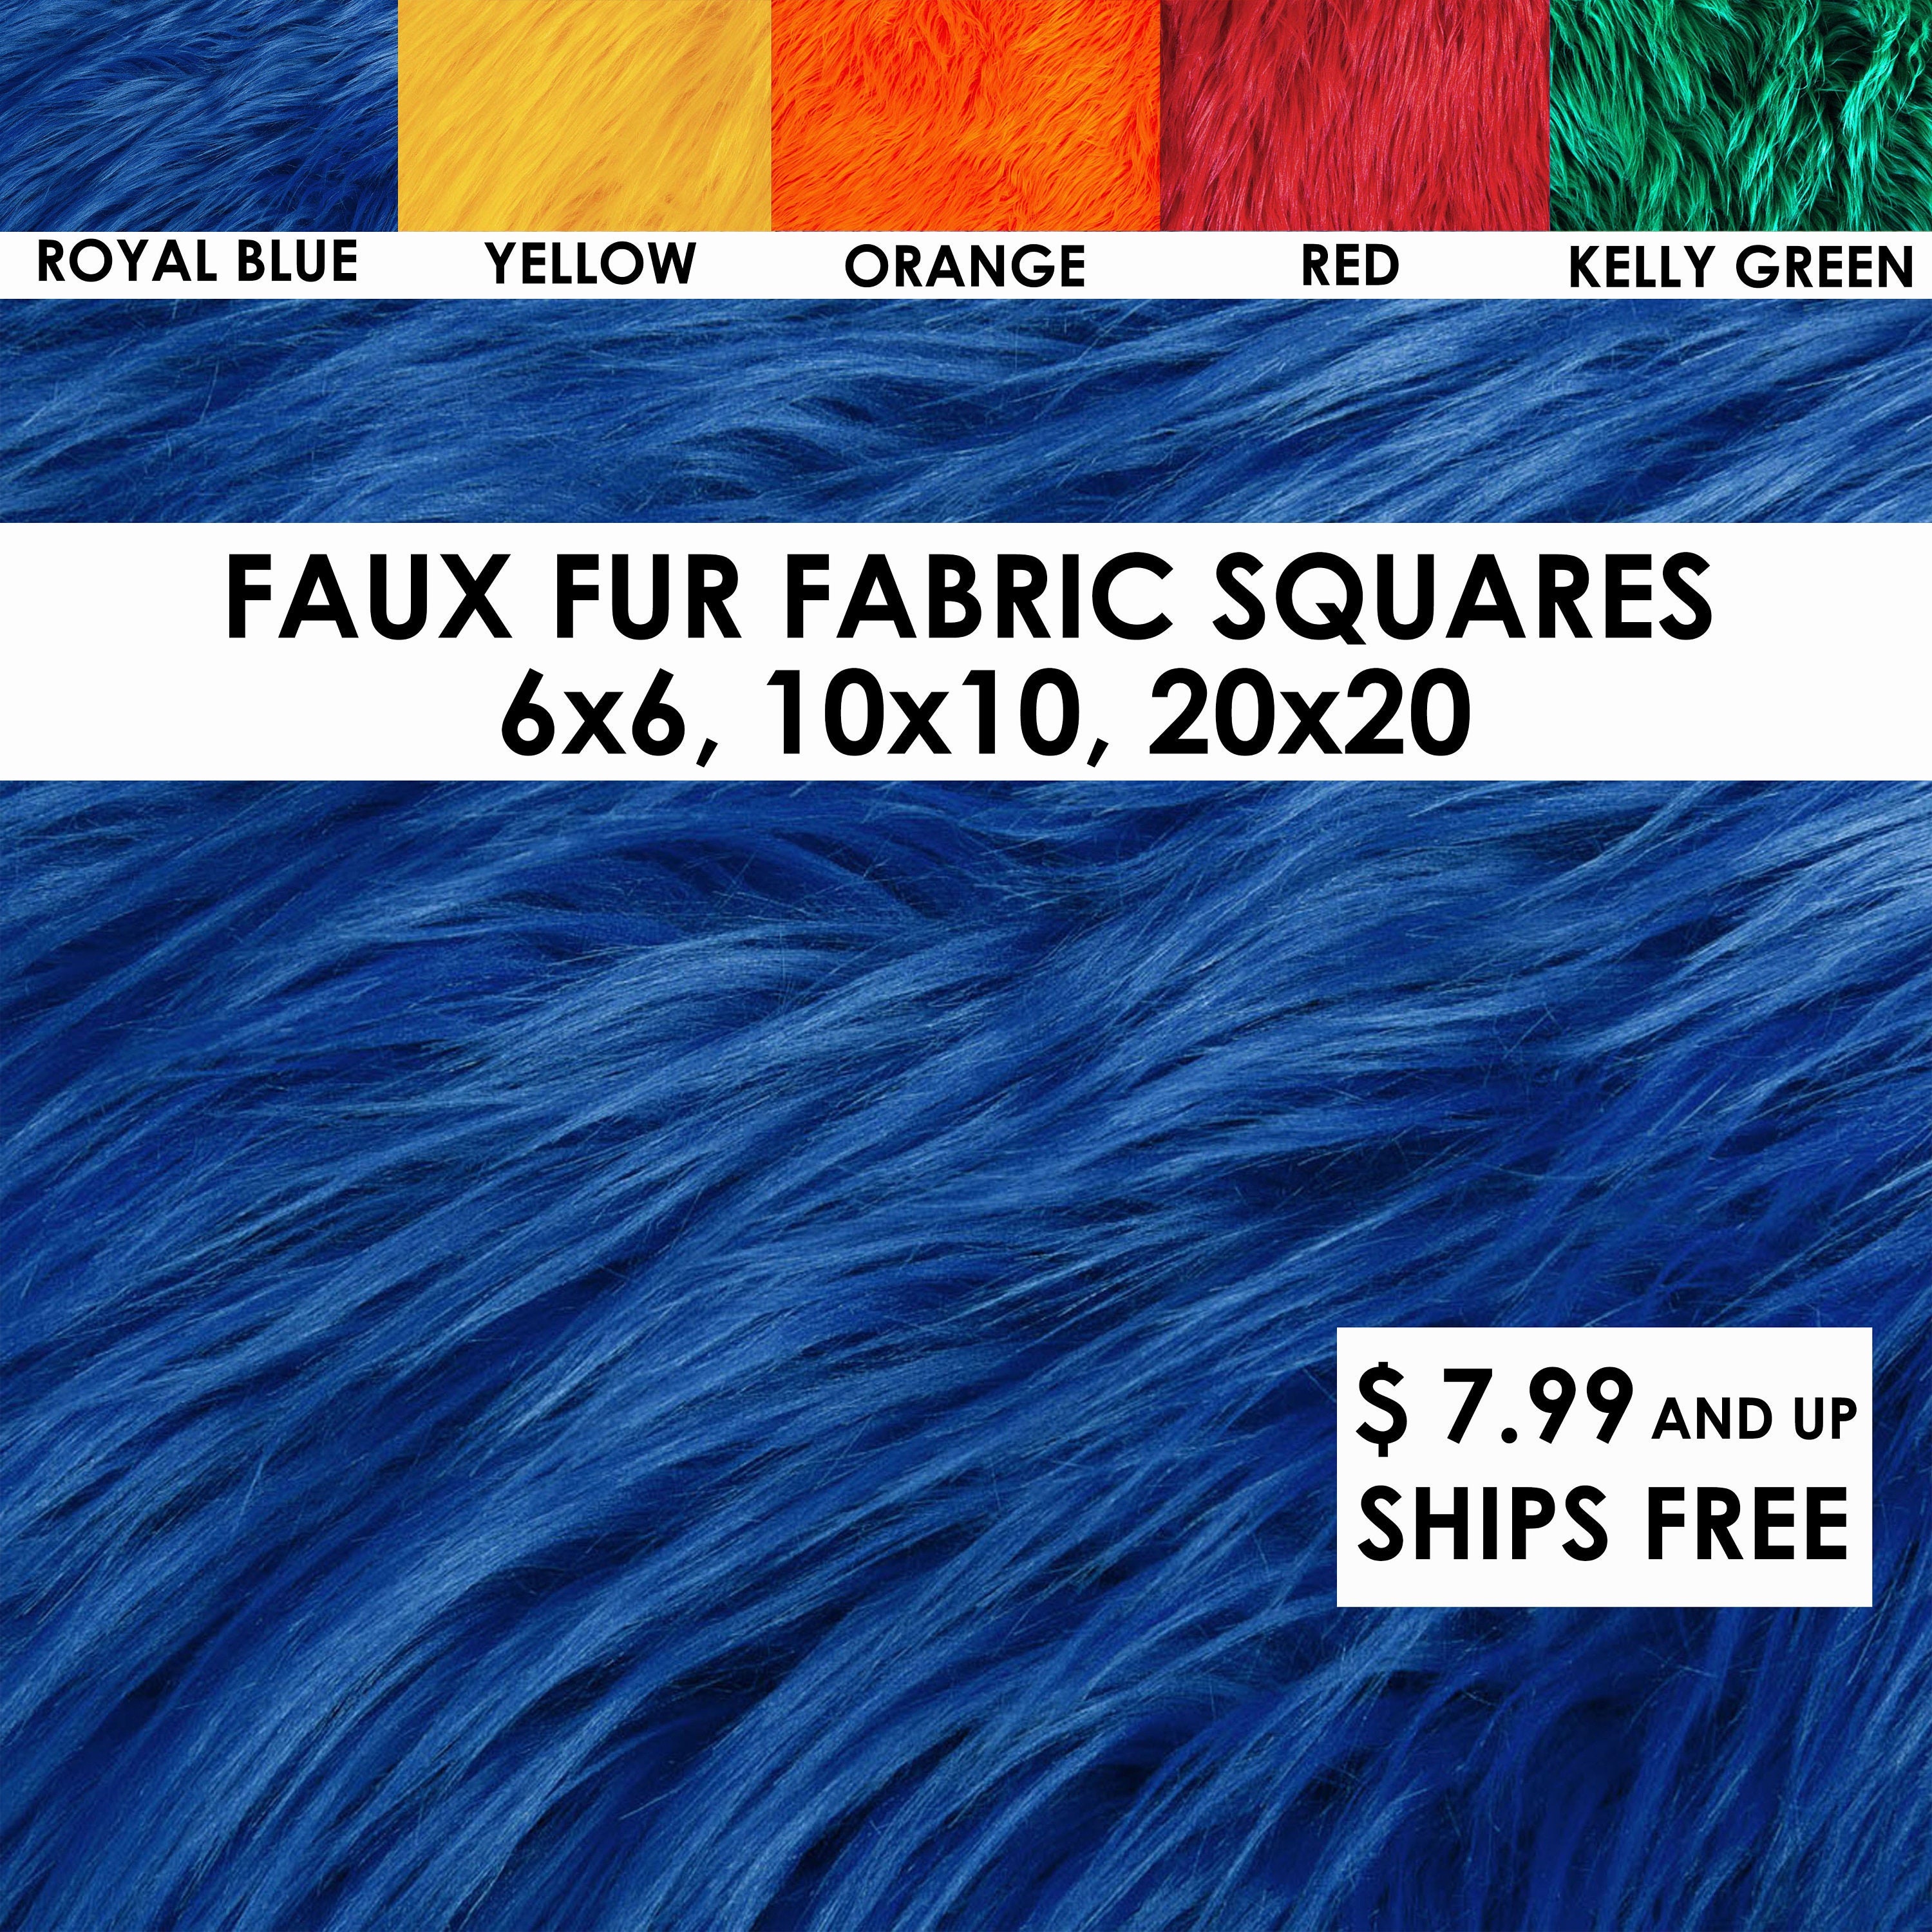 Shaggy Faux Fur Fabric by the Yard Olive